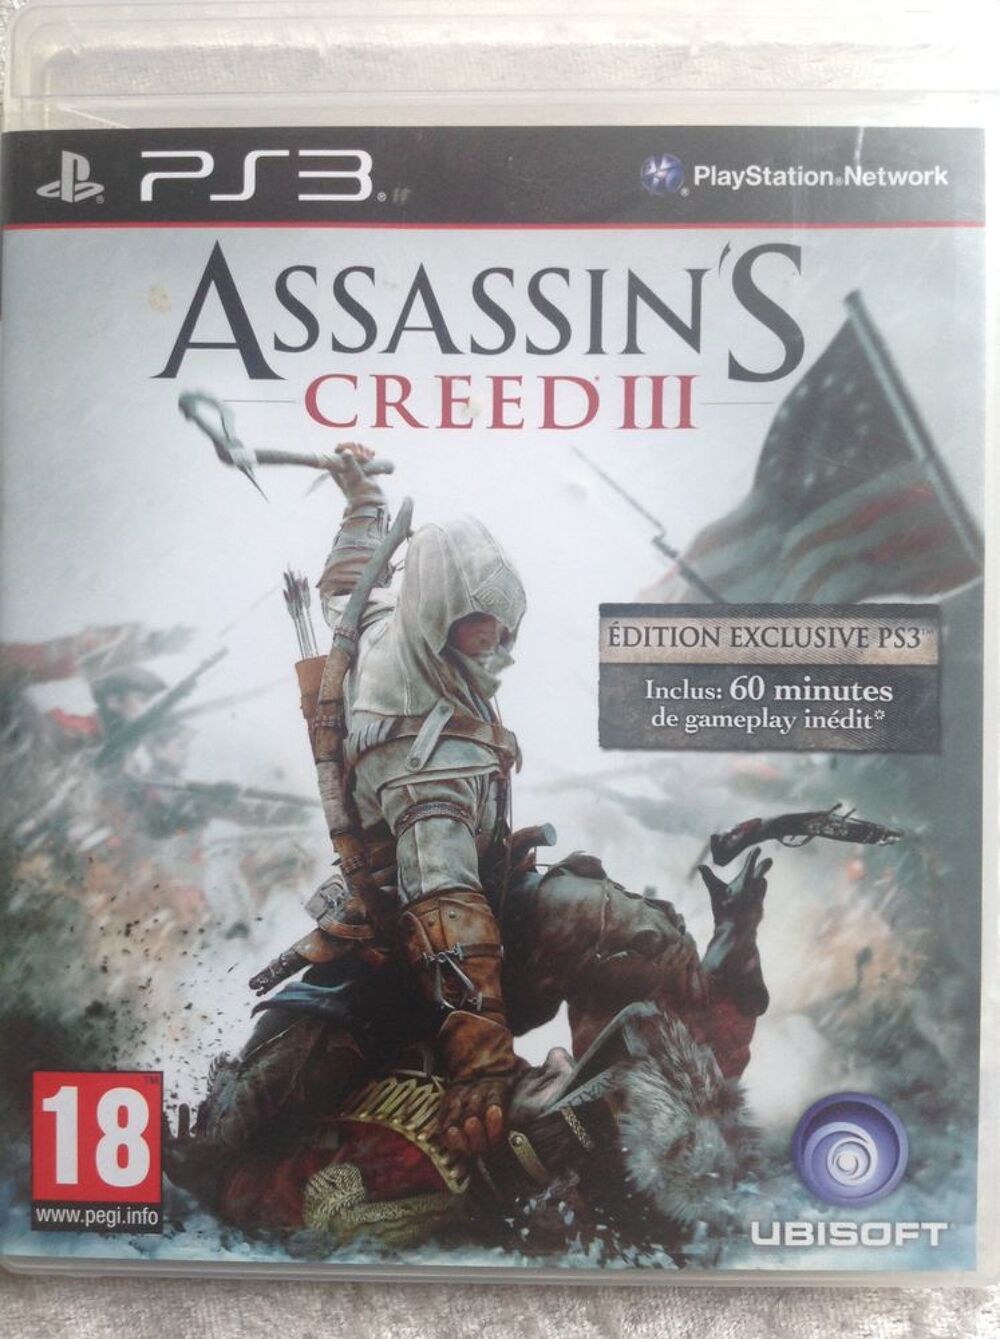 ASSASSIN'S CREED III EDITION EXCLUSIVE PS3 Envoi possible
Consoles et jeux vidos